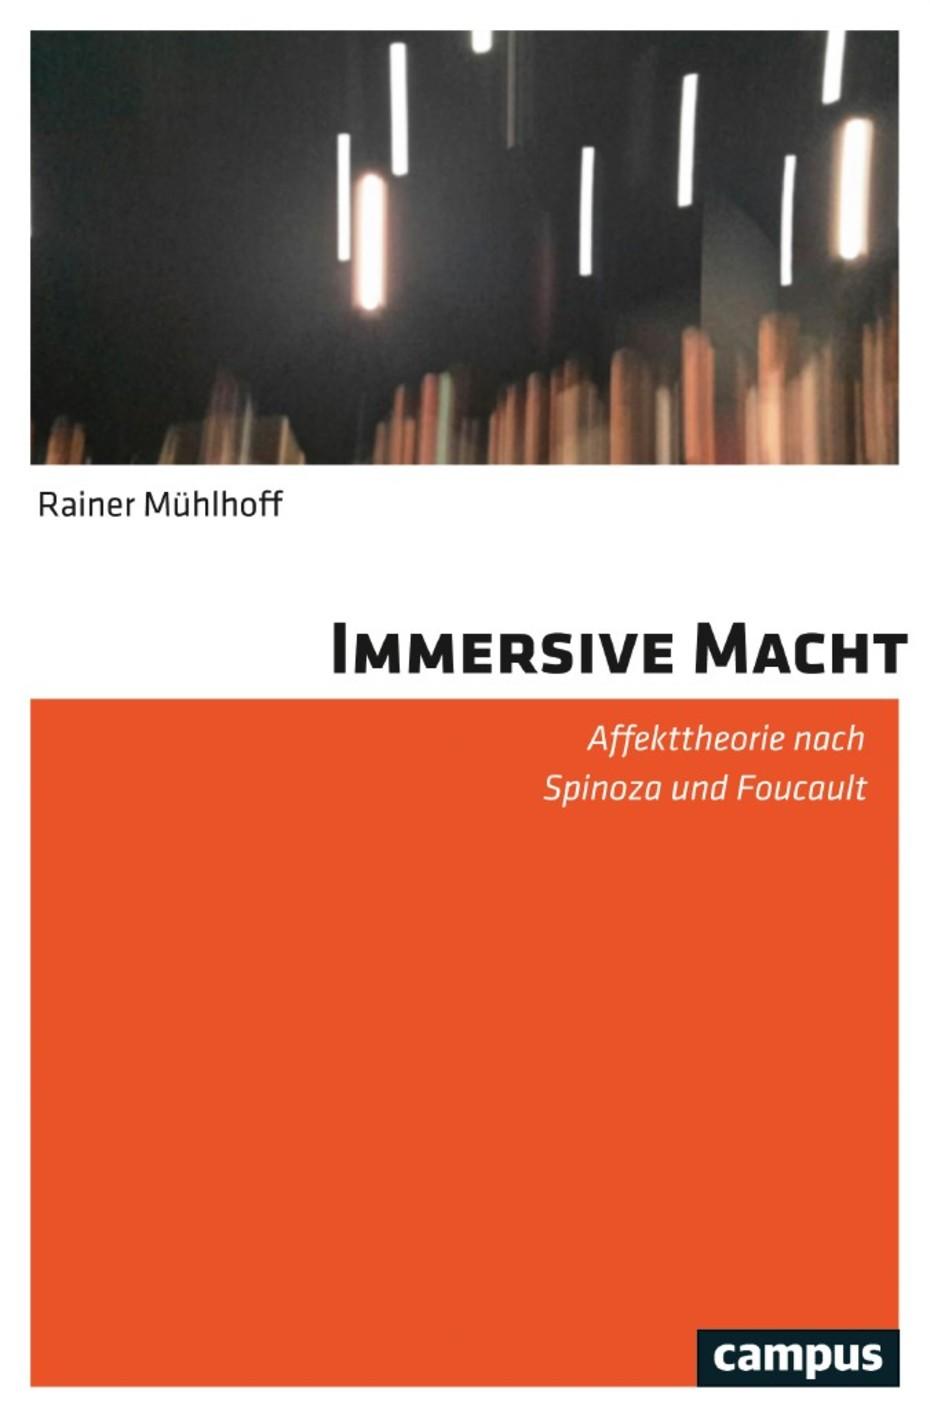 Immersive Macht (Cover)